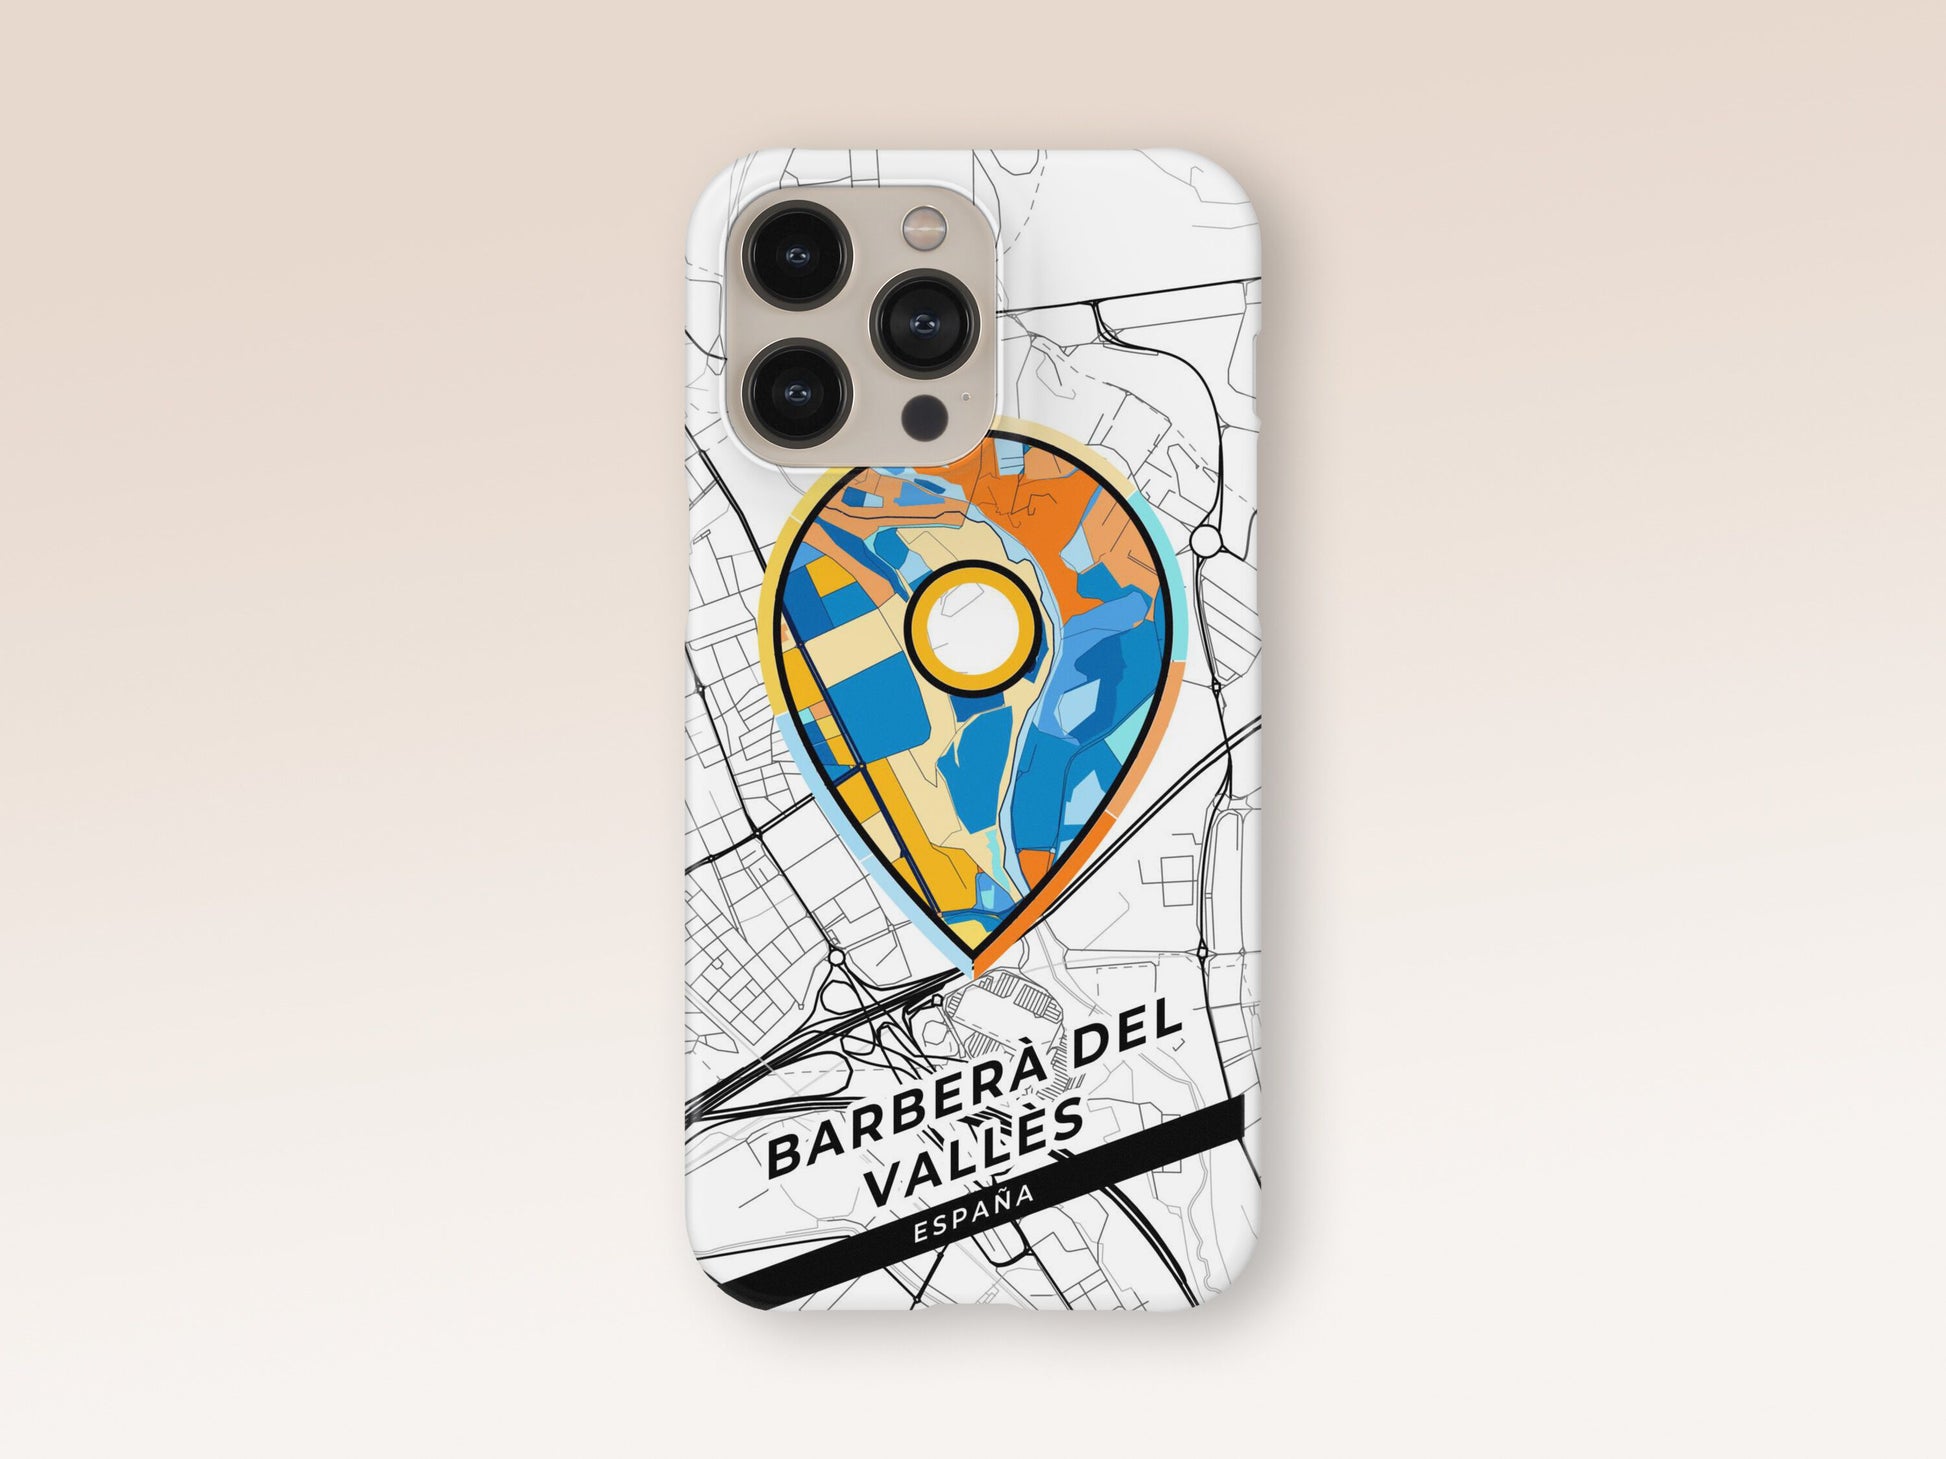 Barberà Del Vallès Spain slim phone case with colorful icon. Birthday, wedding or housewarming gift. Couple match cases. 1